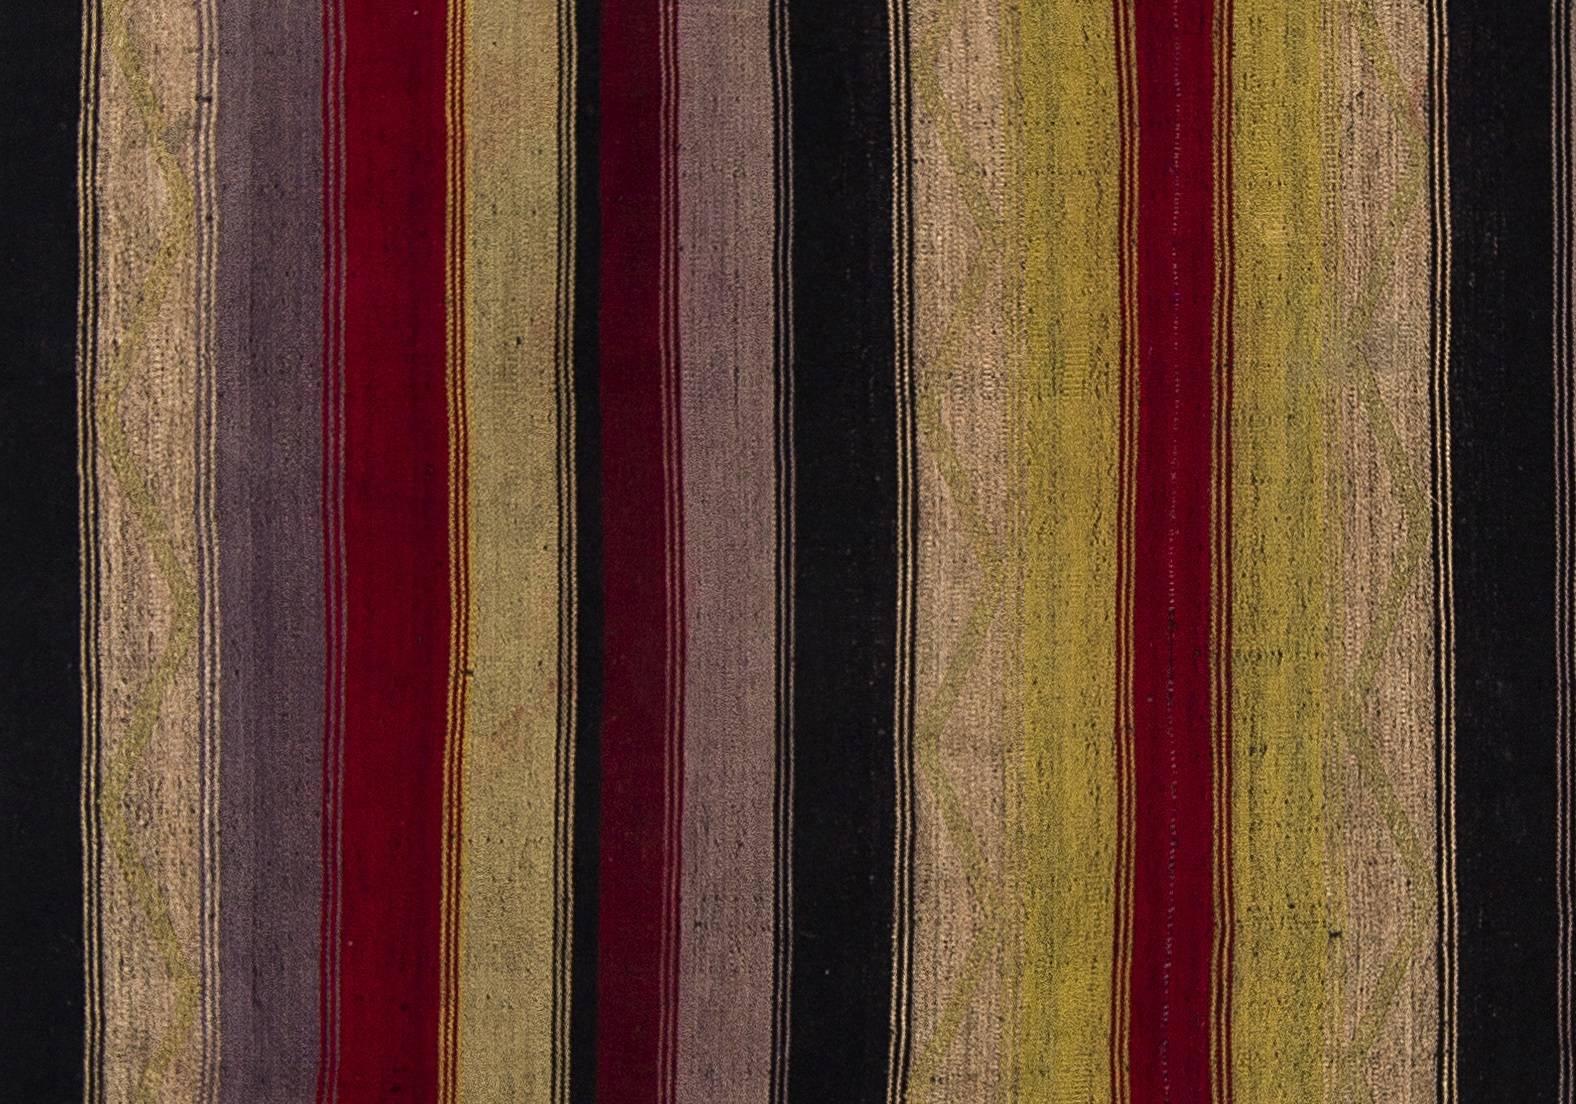 This authentic handwoven flat-weave (Kilim) from Eastern Turkey was made by Nomads to be used as a floor covering in their tents or summer houses around mid-20th century. It is made of multi colored wool.

These vintage utilitarian Kilims were